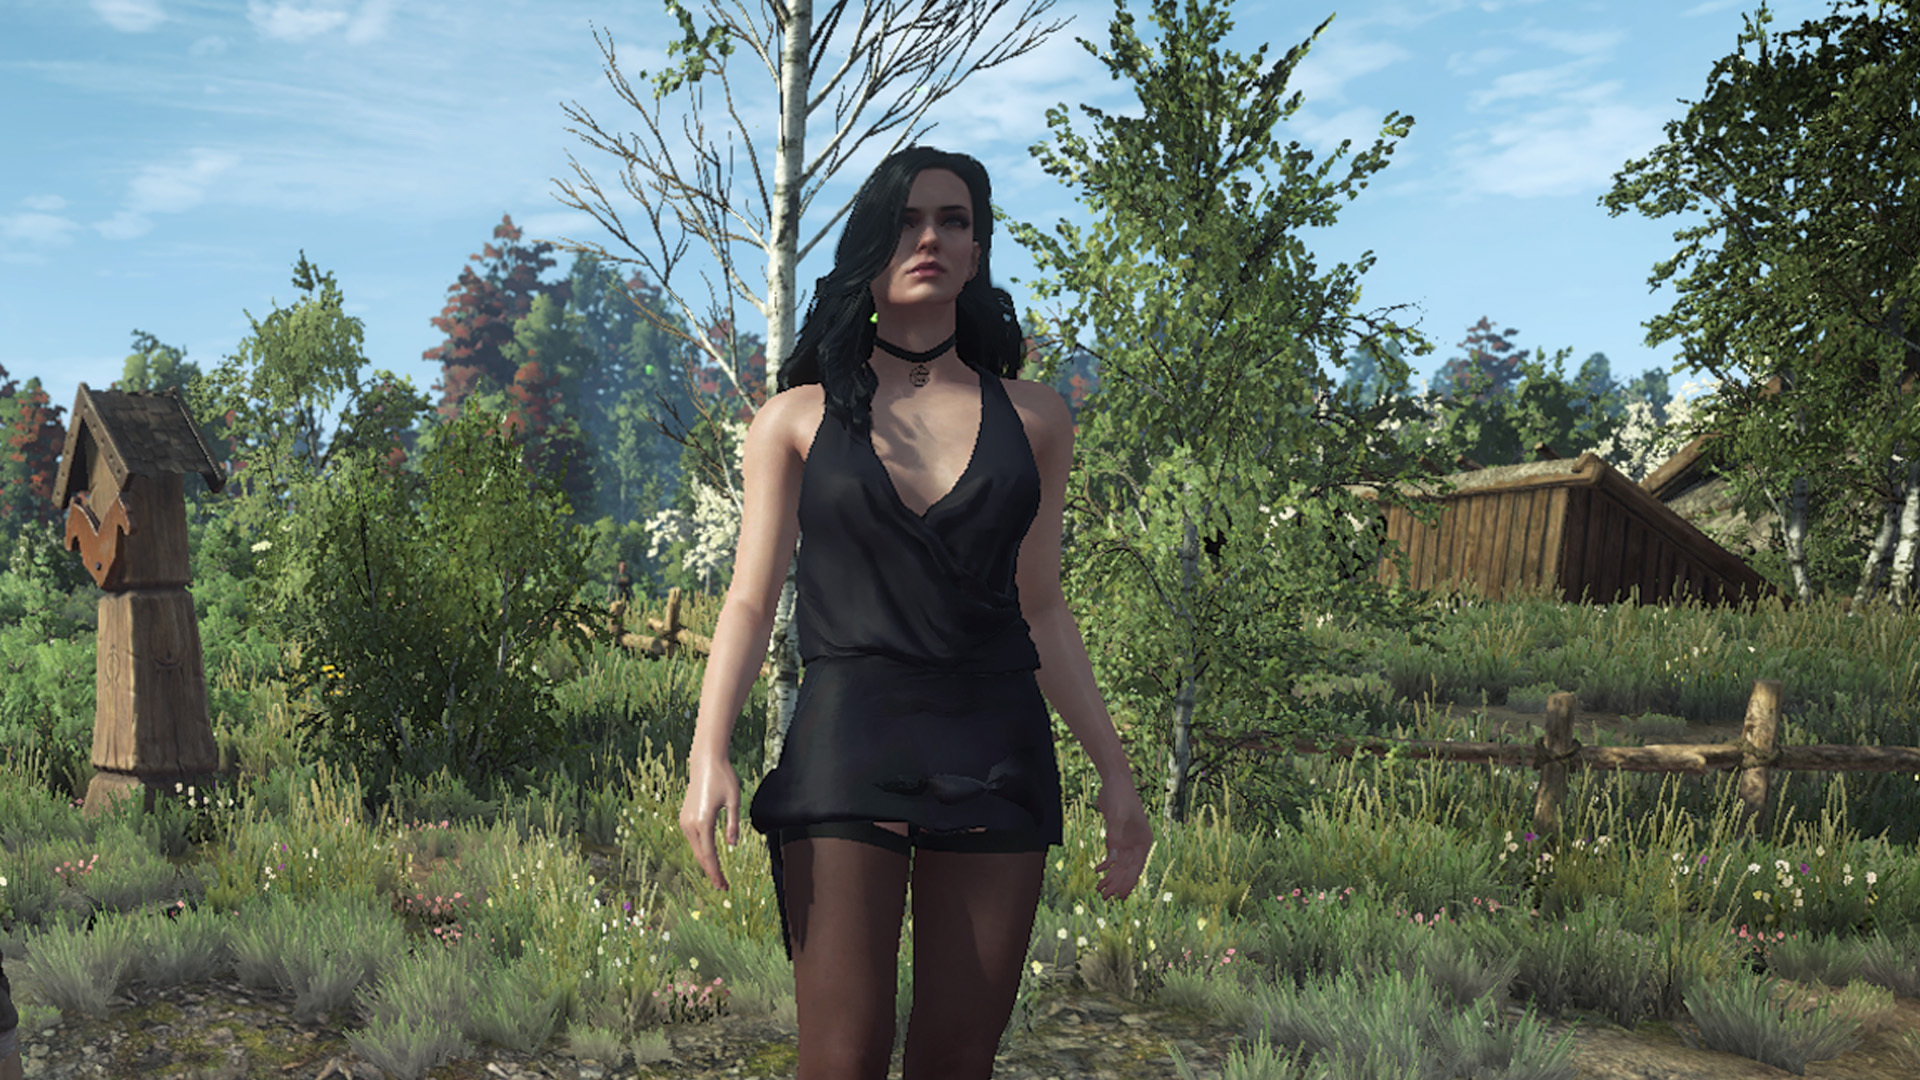 Yennefer of vengerberg the witcher 3 voiced standalone follower se фото 39